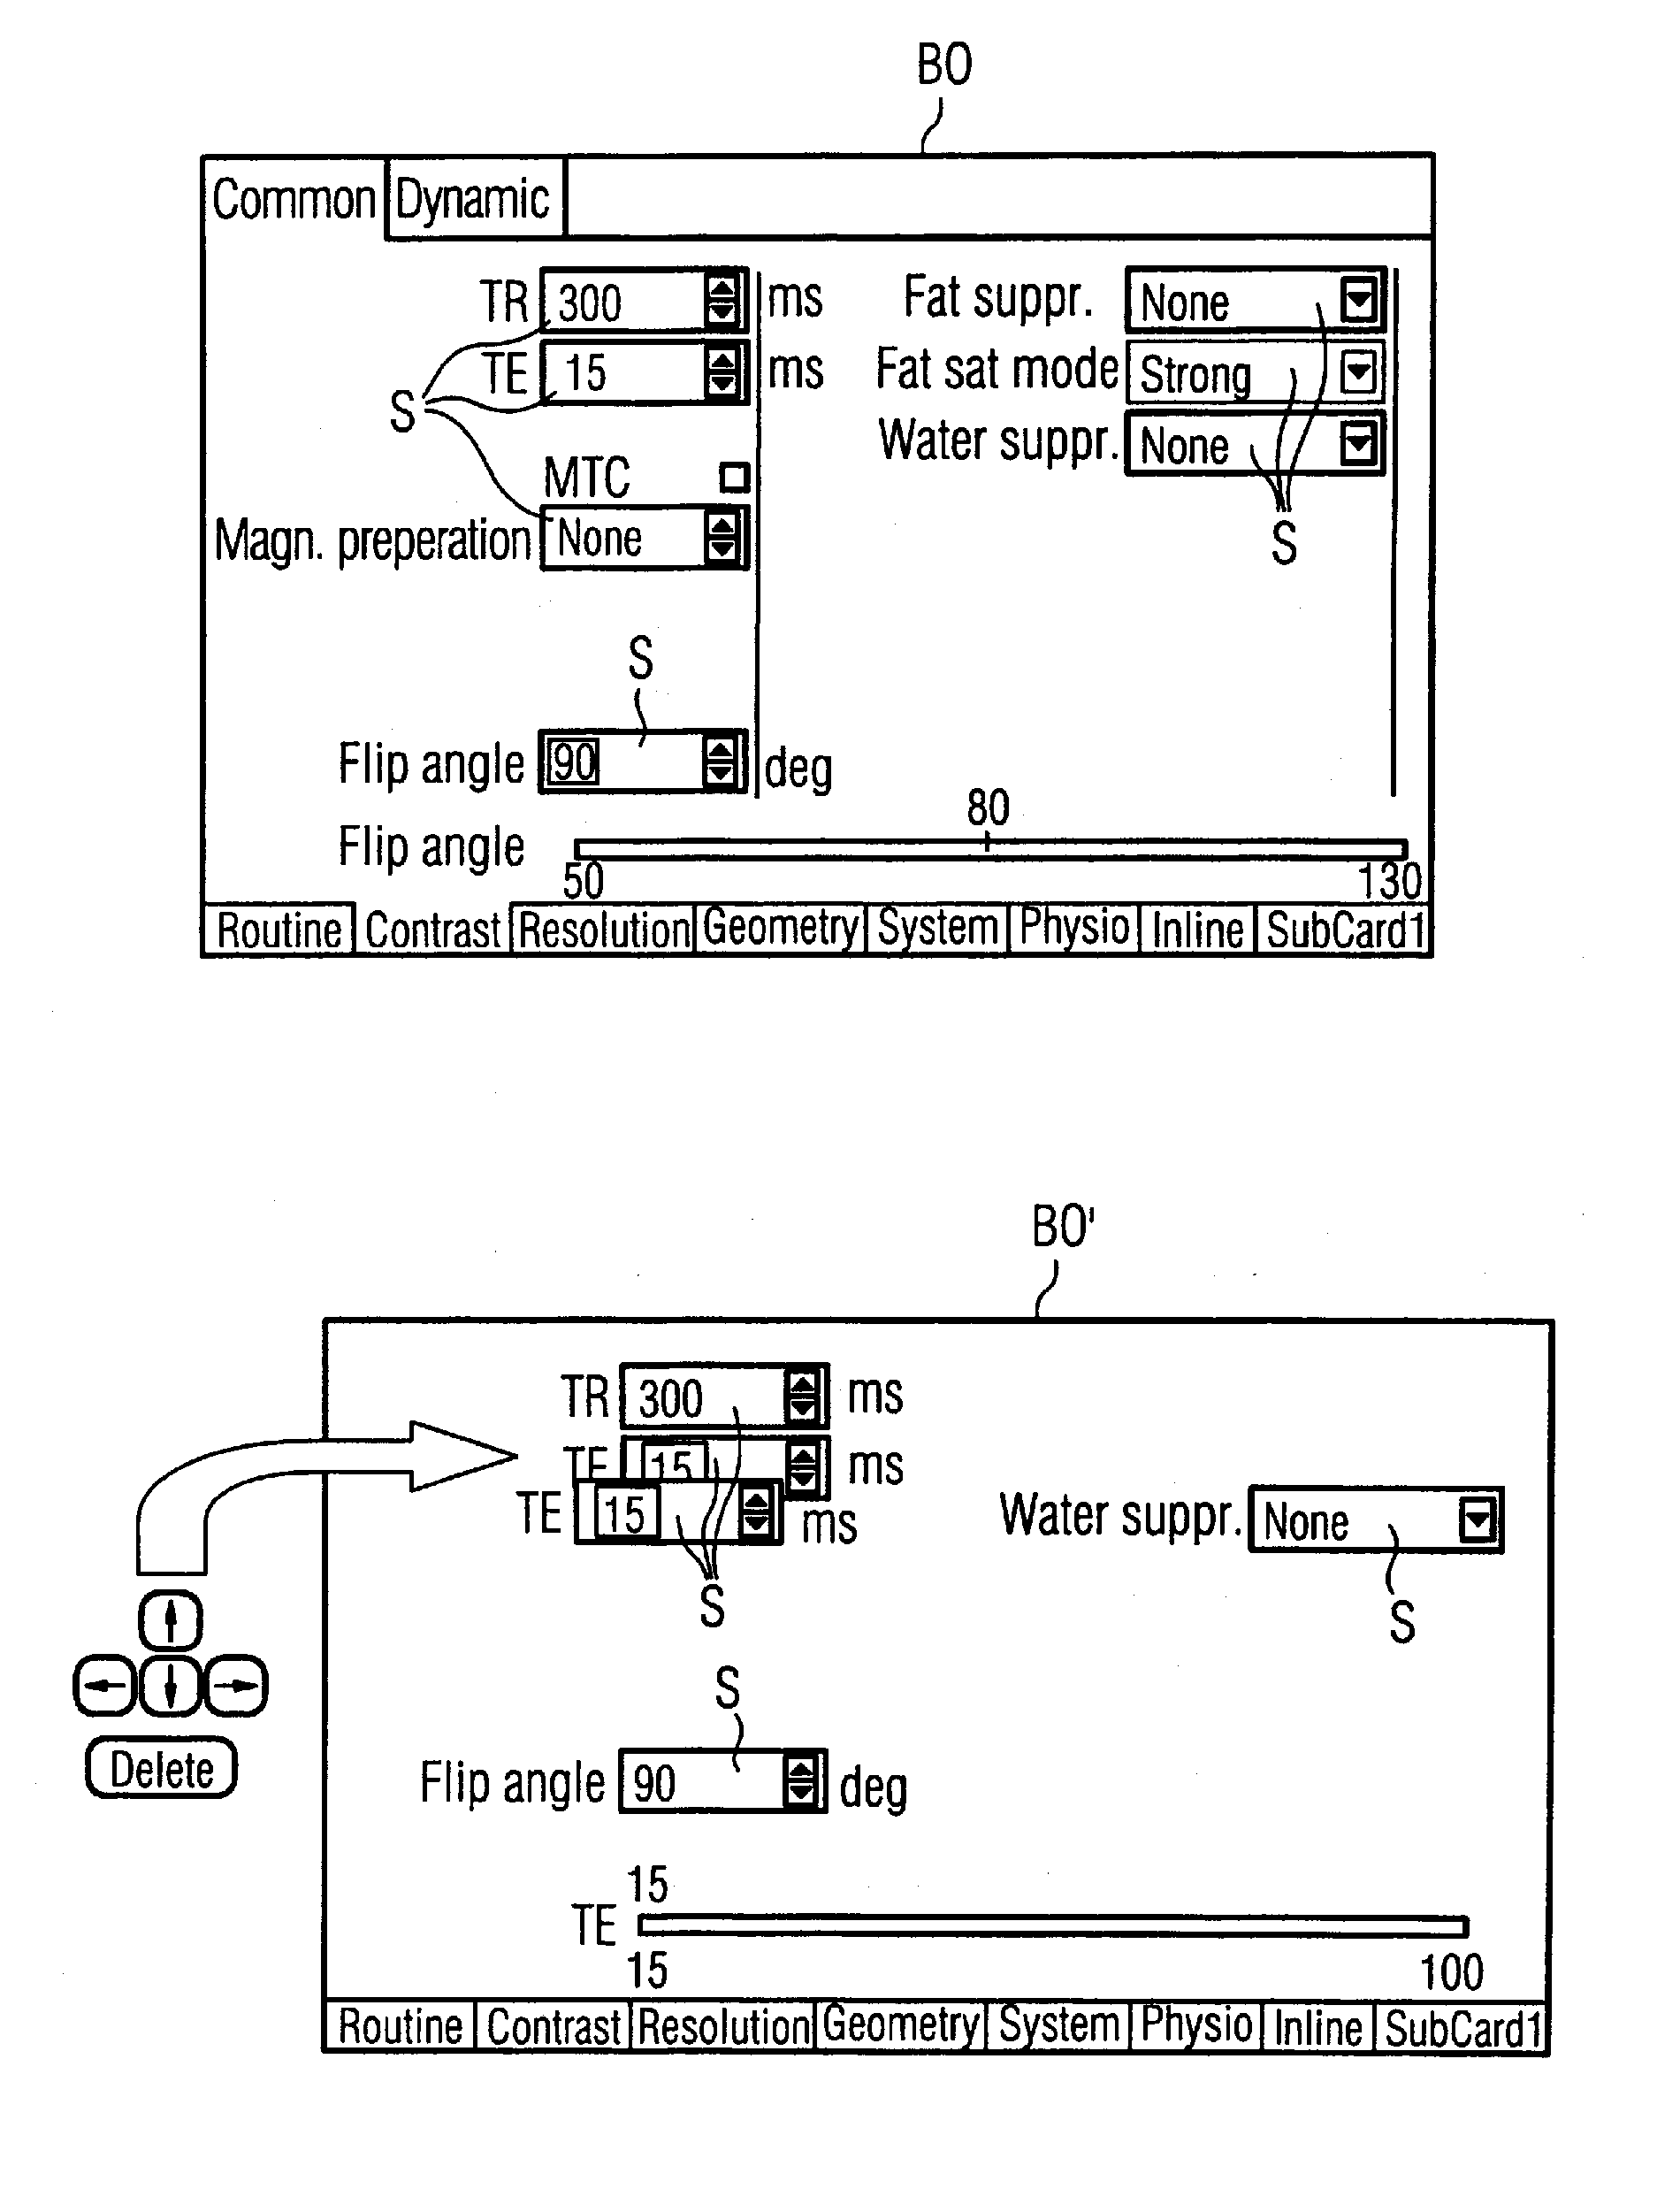 Method and system for generation of a user interface